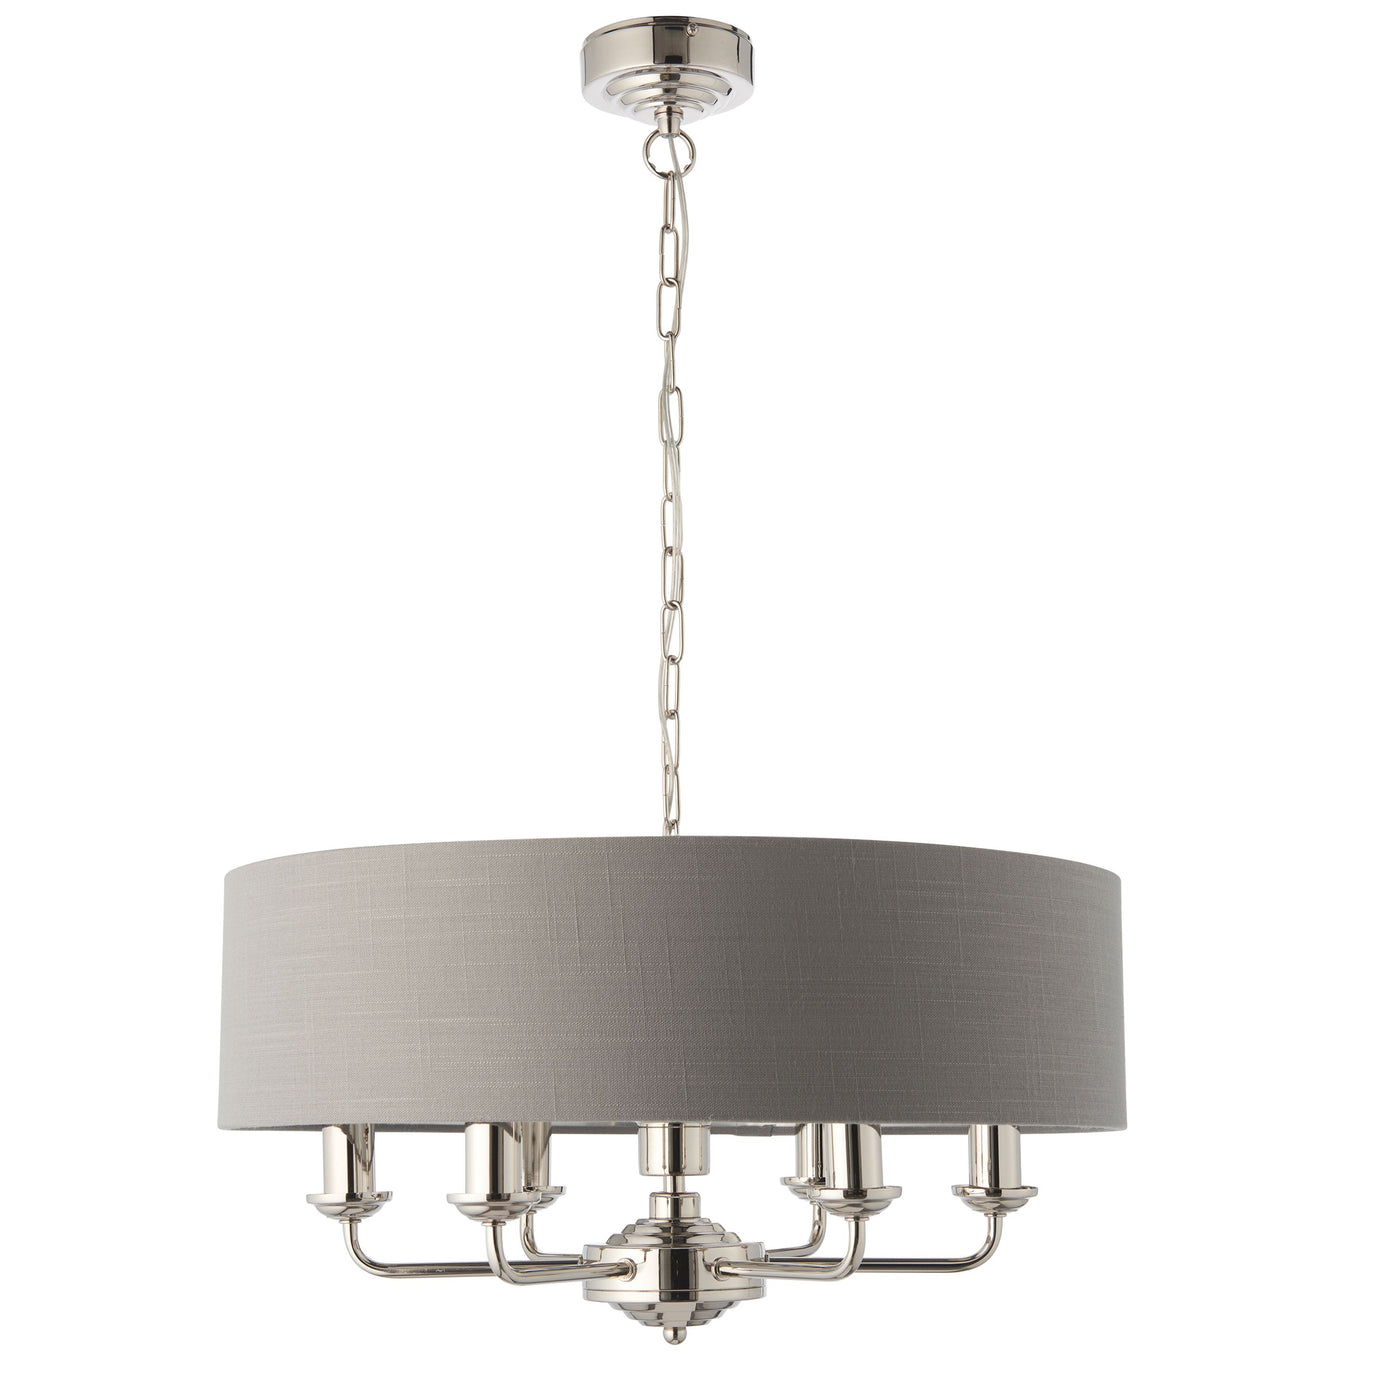 Chickerell 6 Pendant Light Nickle & Charcoal 350-1200mm